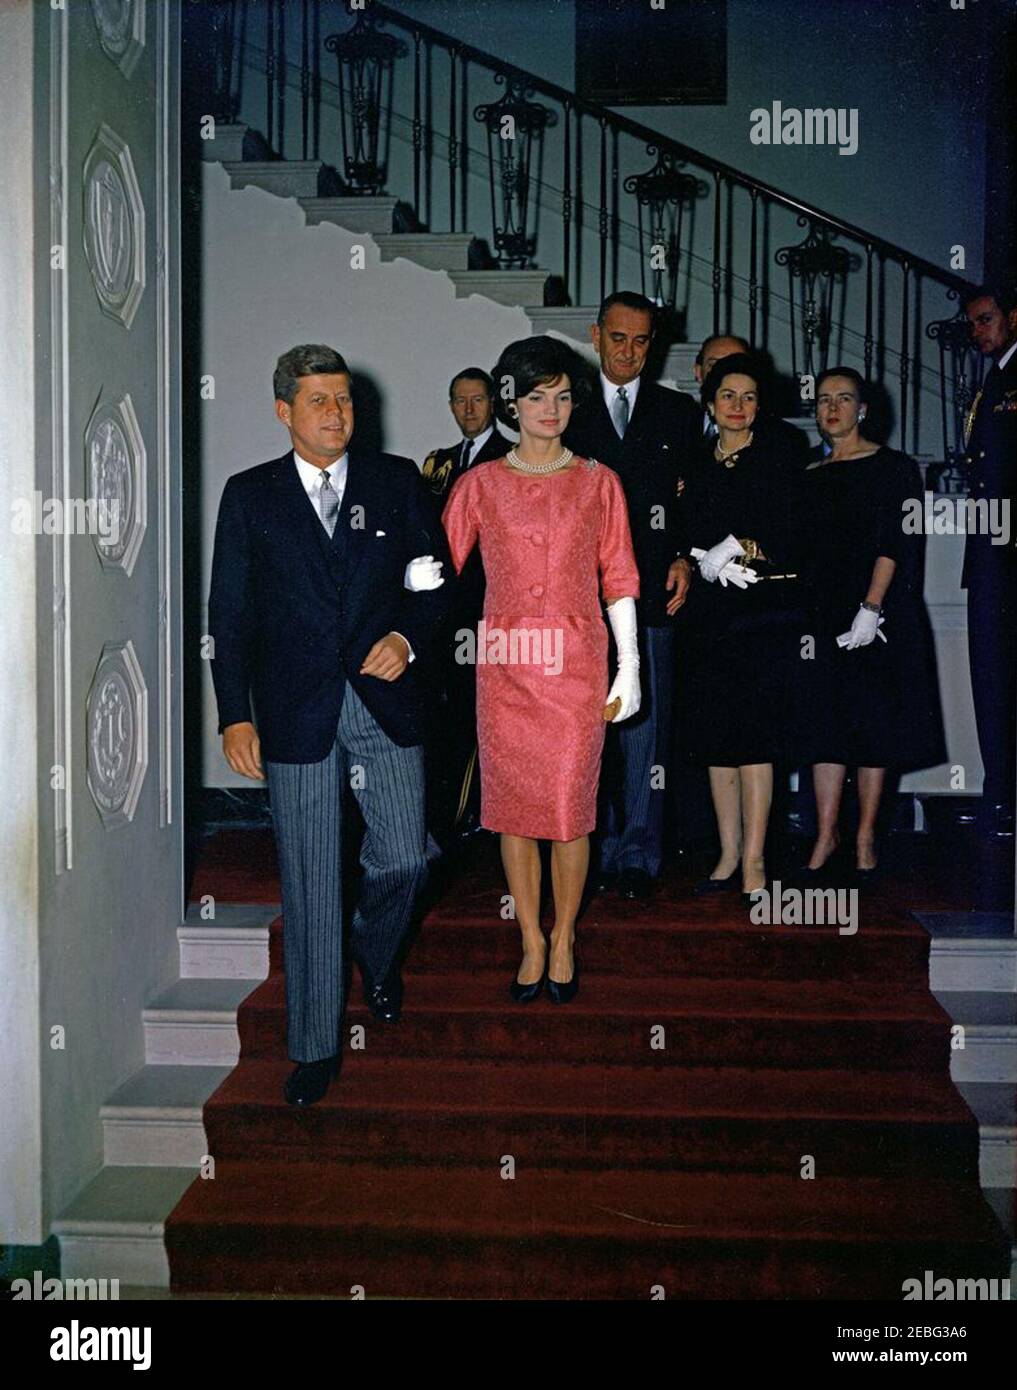 Reception for members of the Diplomatic Corps, 5:00PM. Reception for members of the Diplomatic Corps, White House, Washington, D.C. President John F. Kennedy and First Lady Jacqueline Kennedy descend the Grand Staircase to the Entrance Hall. Behind them (L-R) are Military Aide to the President Chester V. Clifton; Vice President Lyndon B. Johnson; Secretary of State Dean Rusk (partially hidden); Lady Bird Johnson; Dean Rusku0027s wife Virginia Rusk; Naval Aide to the President Tazewell Shepard, Jr. Stock Photo